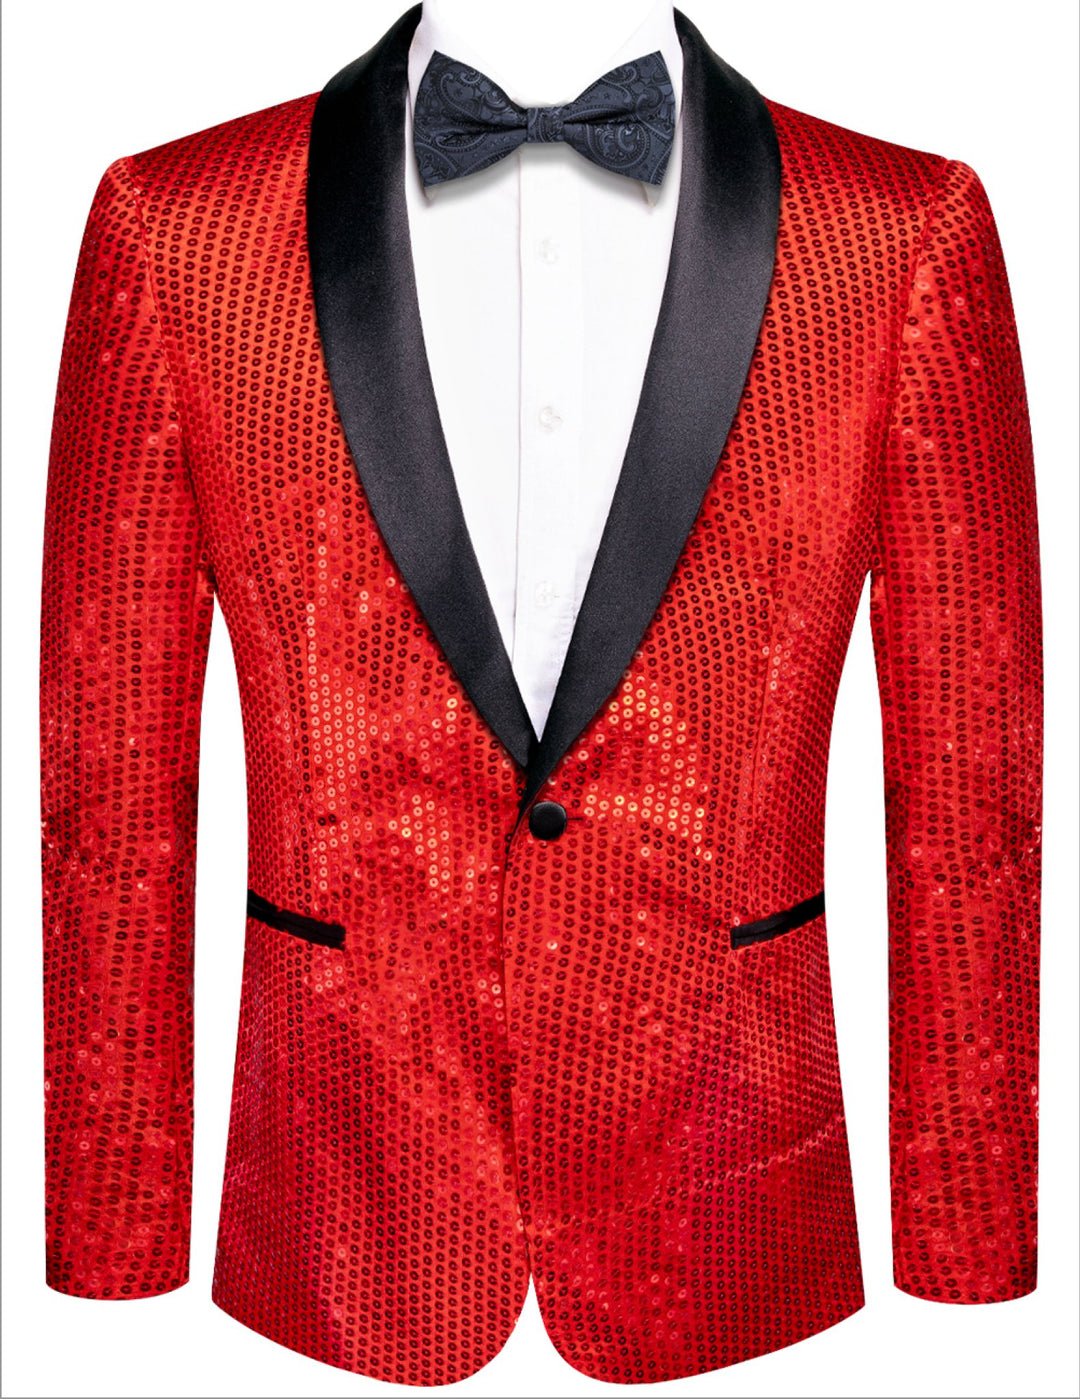 Sequin Red Solid Jacket with Black Shawl Collar - XX - 1083 - SimonVon Shop